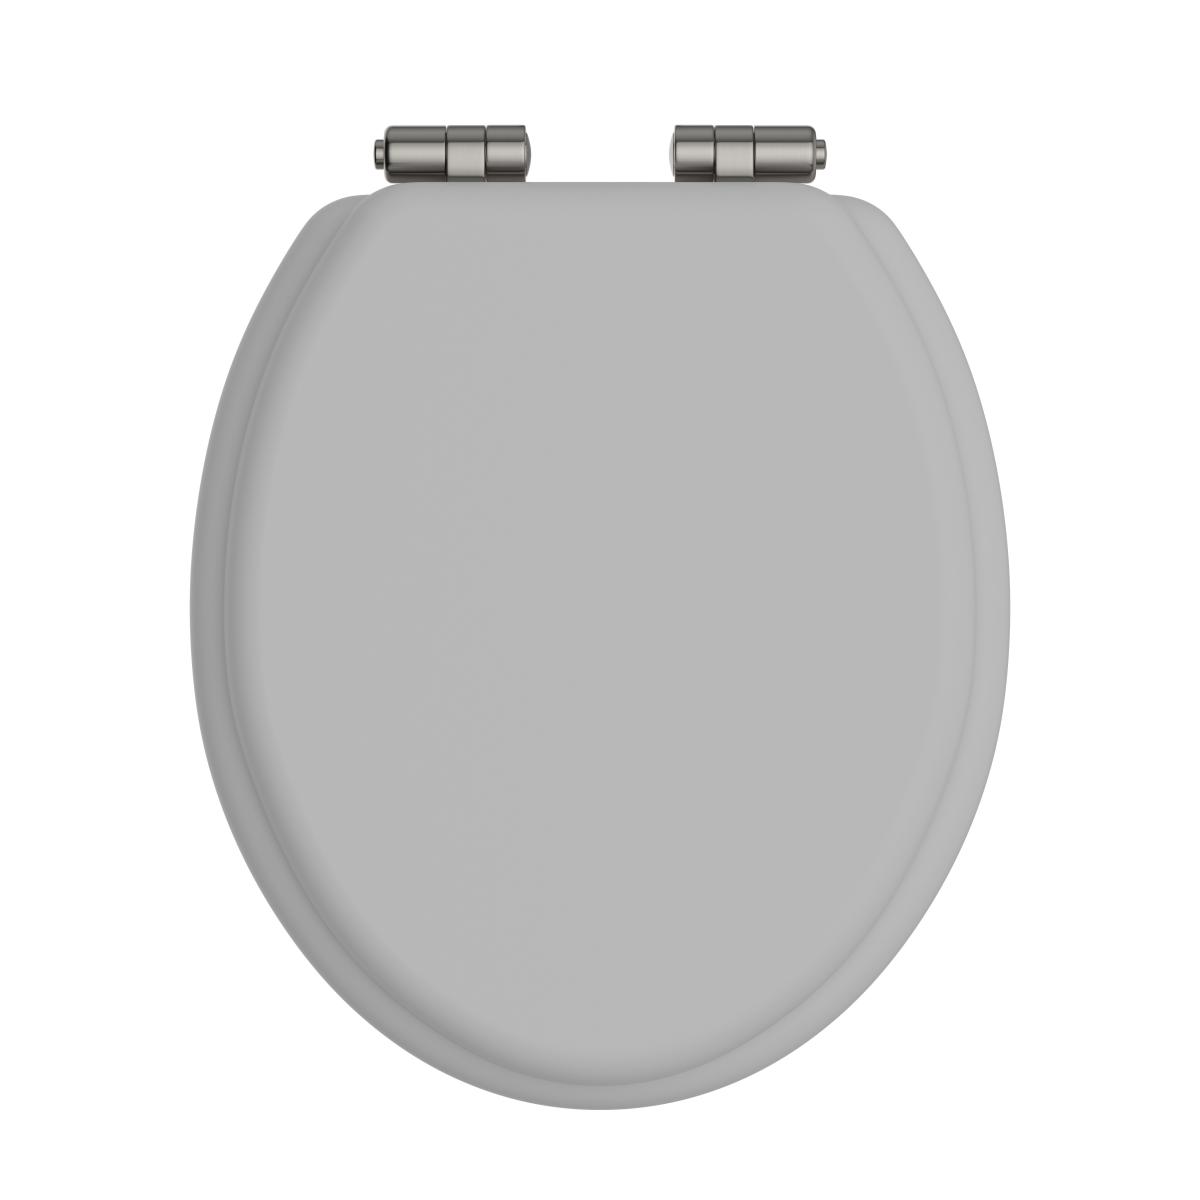 Toilet Seat Soft Close Brushed Nickel Hinges - Dove Grey